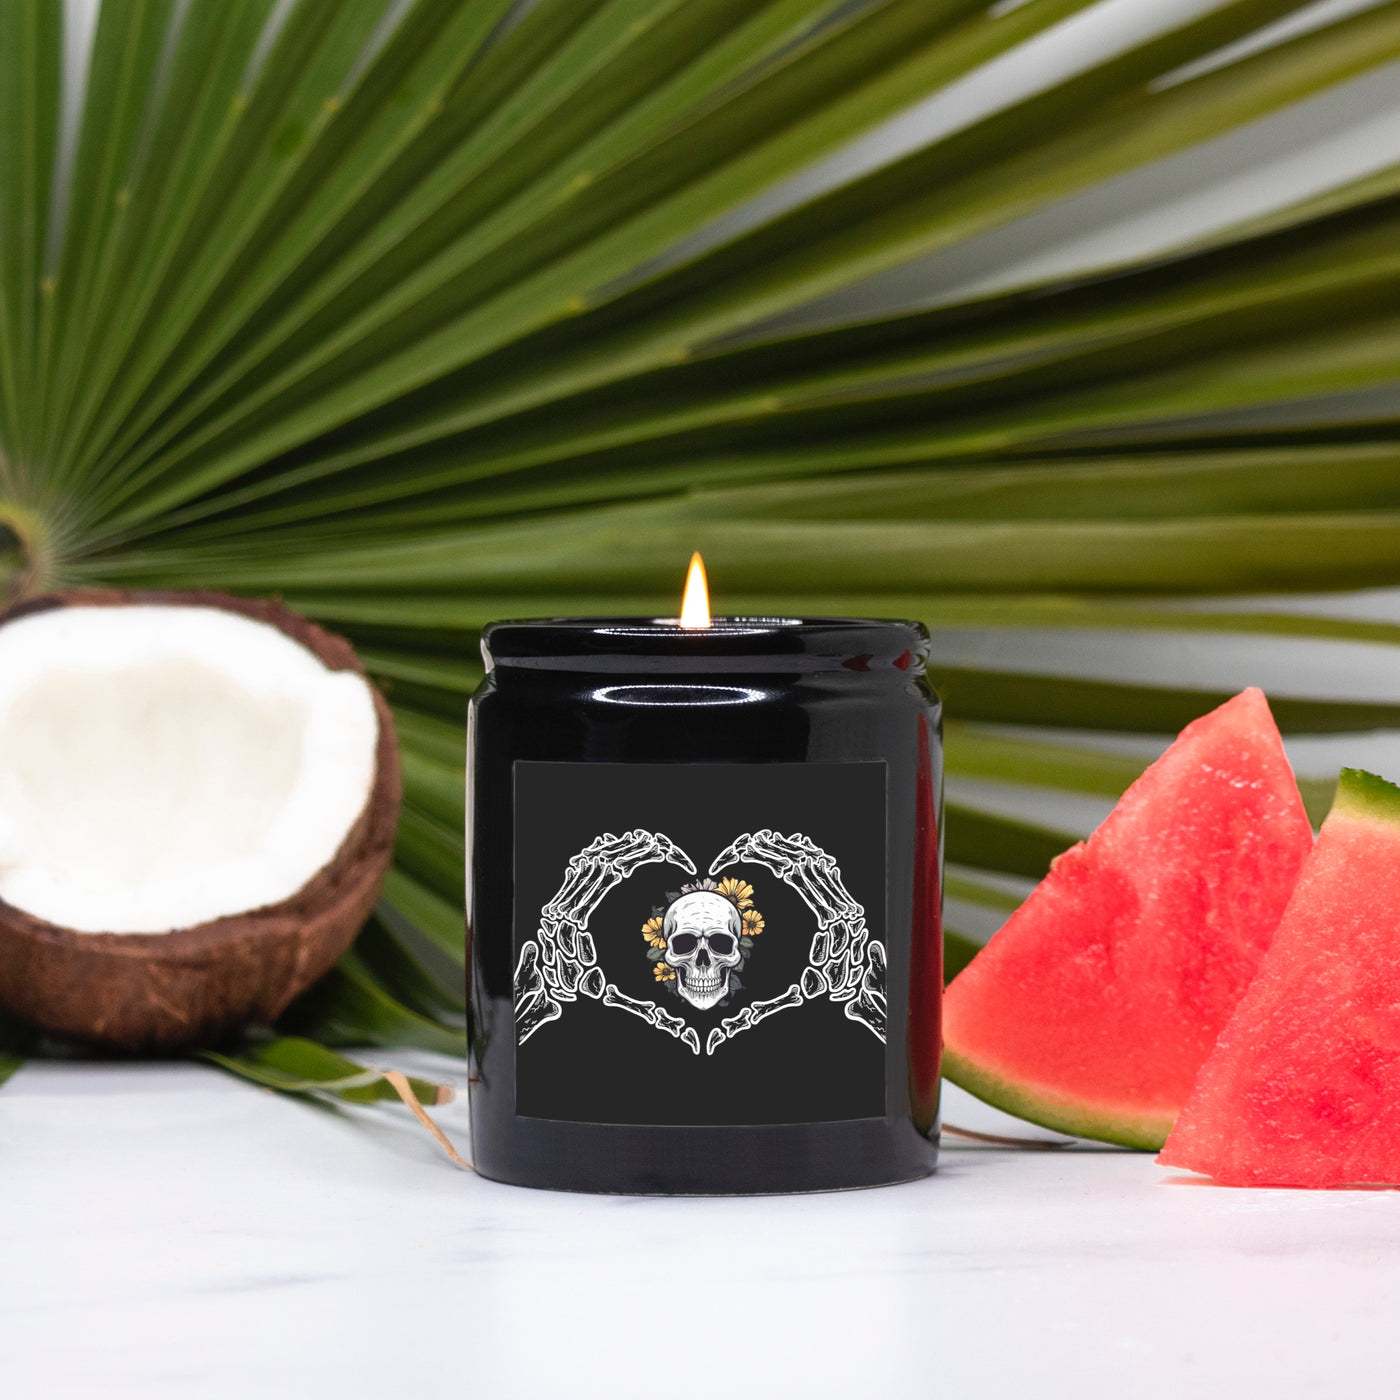 Skeleton Hands Heart  and Skull Ceramic Candle